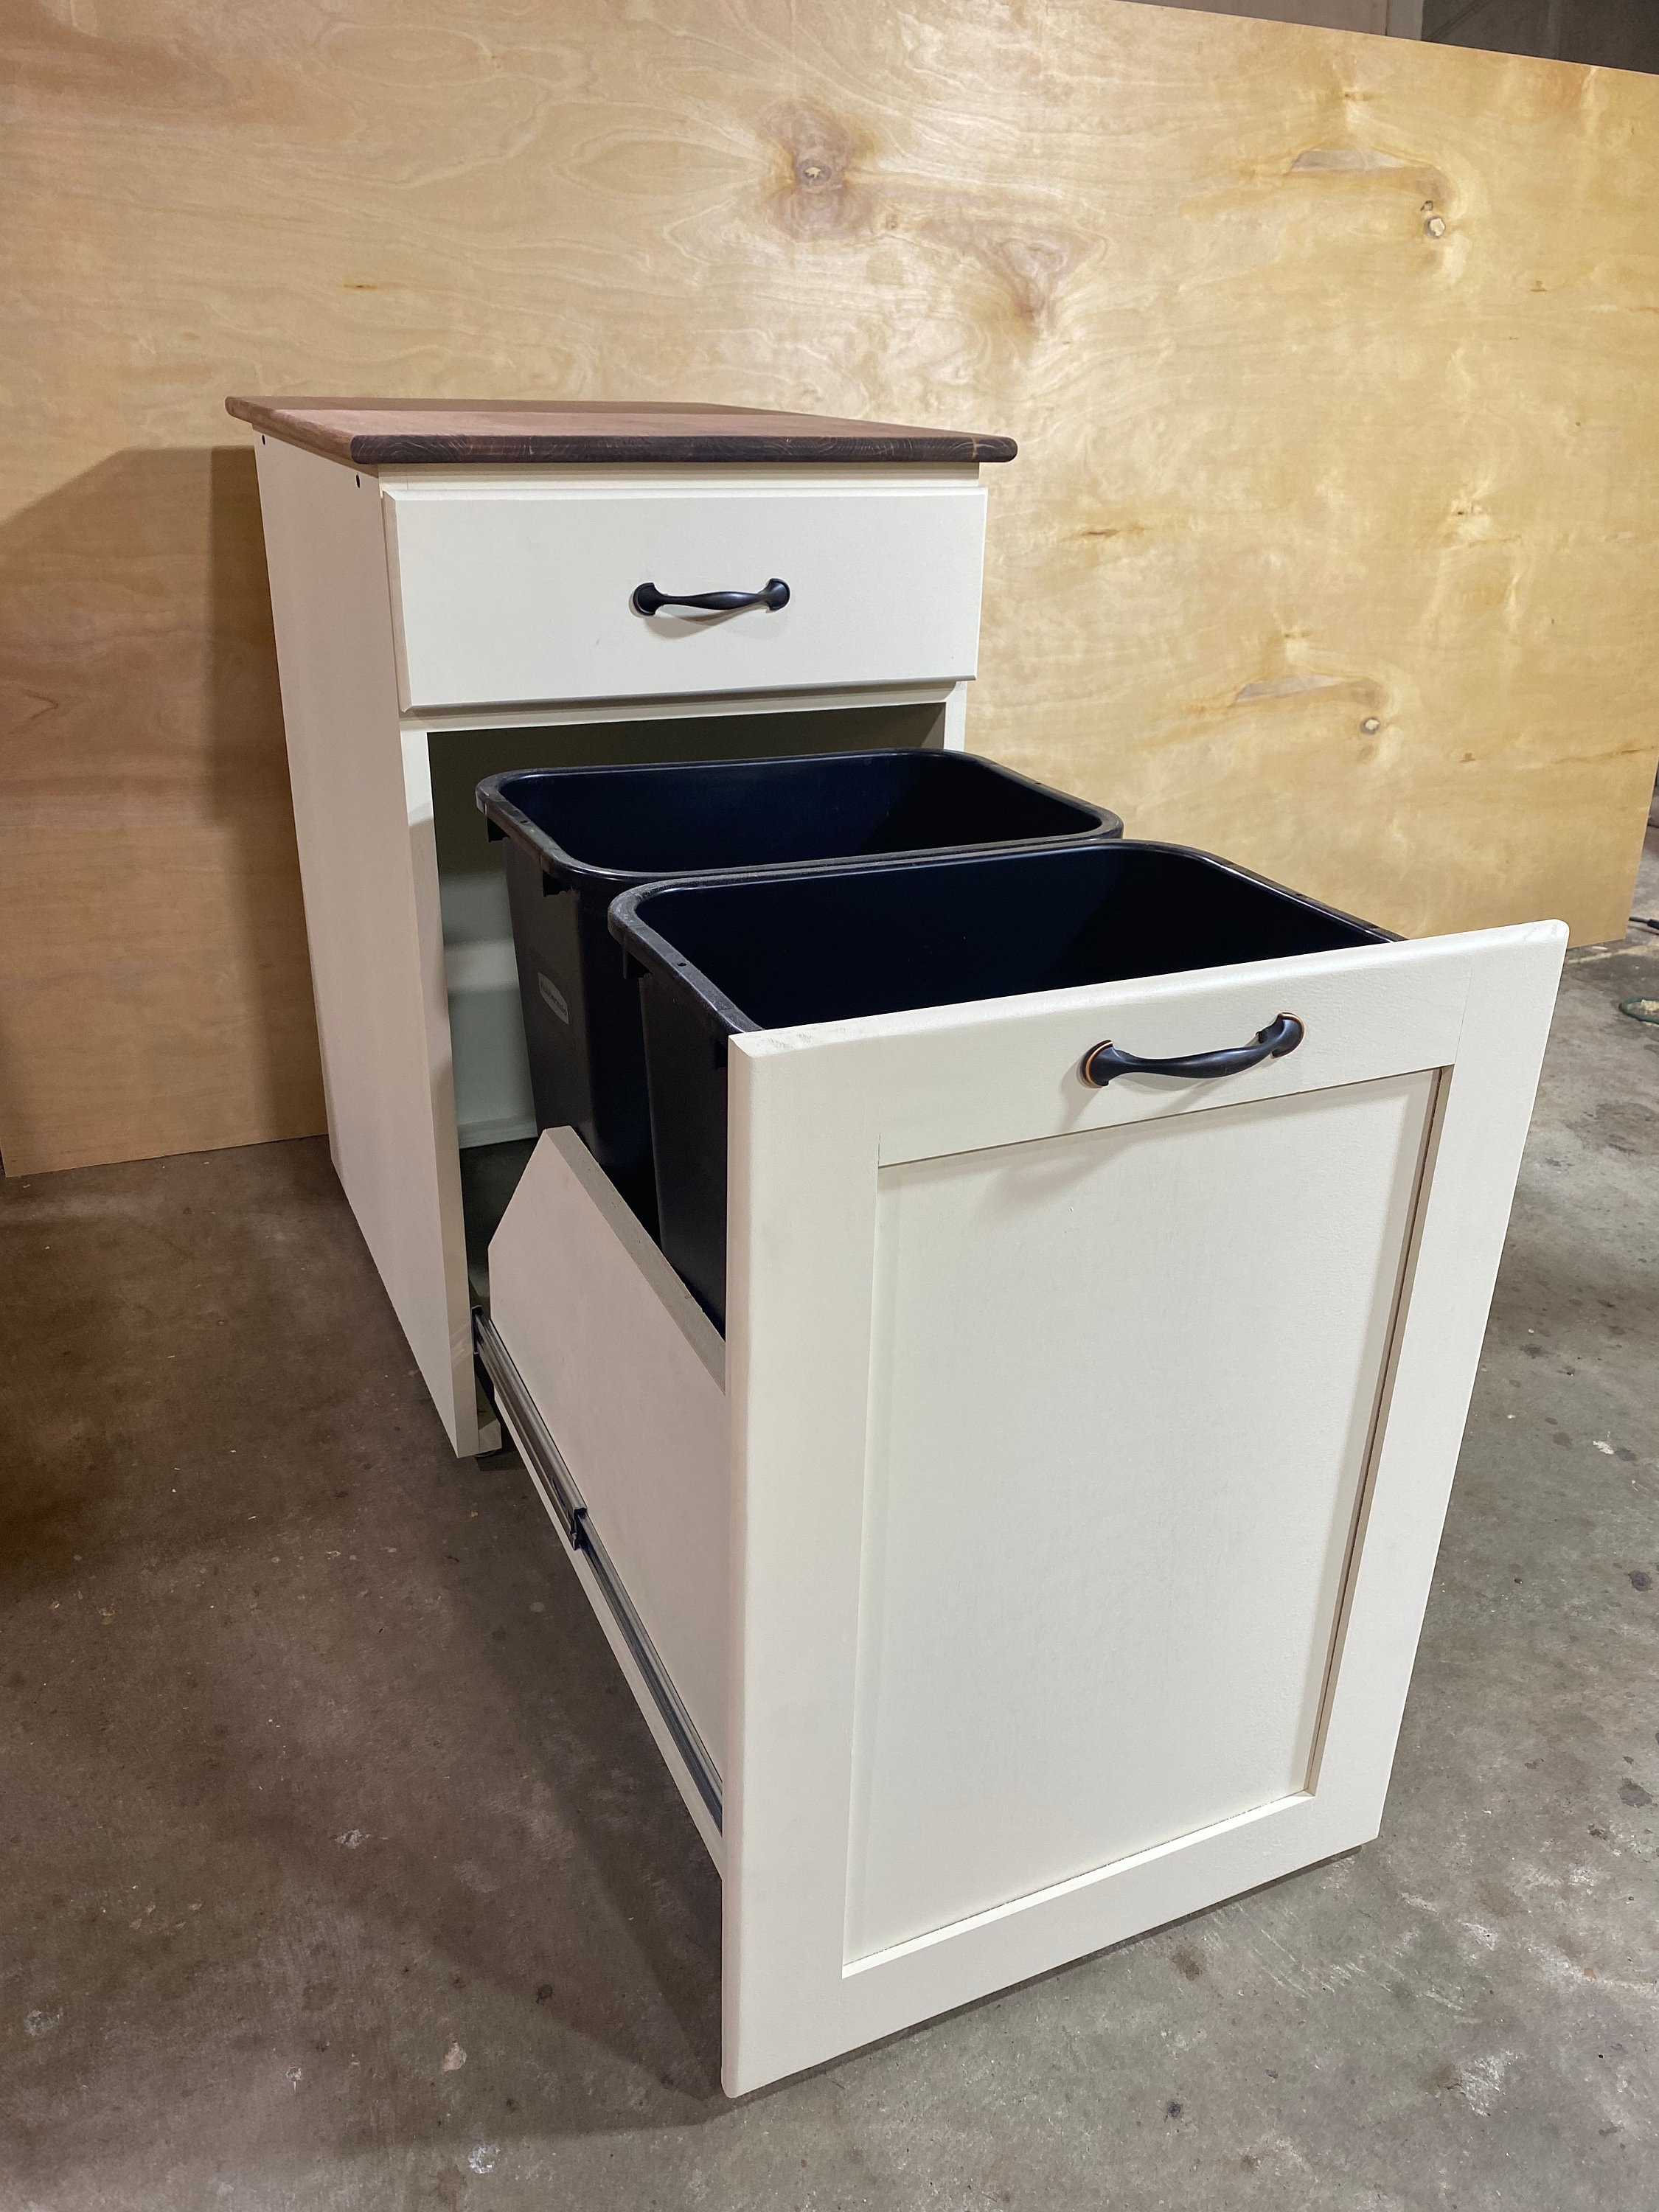 Dropship Kitchen Tilt Out Trash Bin Cabinet Free Standing Recycling Cabinet  Trash Can Holder With Drawer, Black-AS to Sell Online at a Lower Price